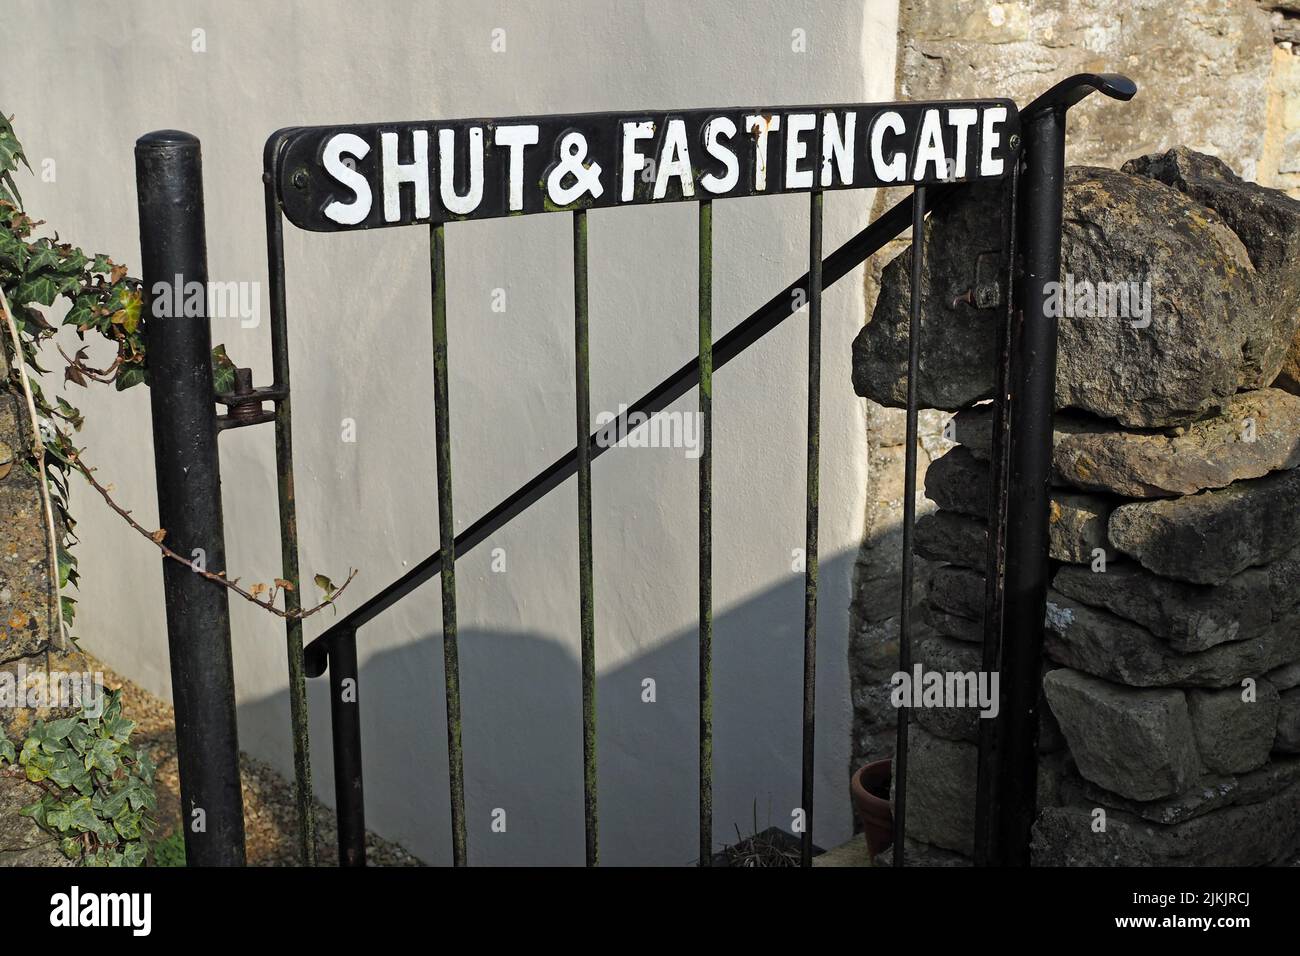 Metal gate with Shut and Fasten Gate text Stock Photo